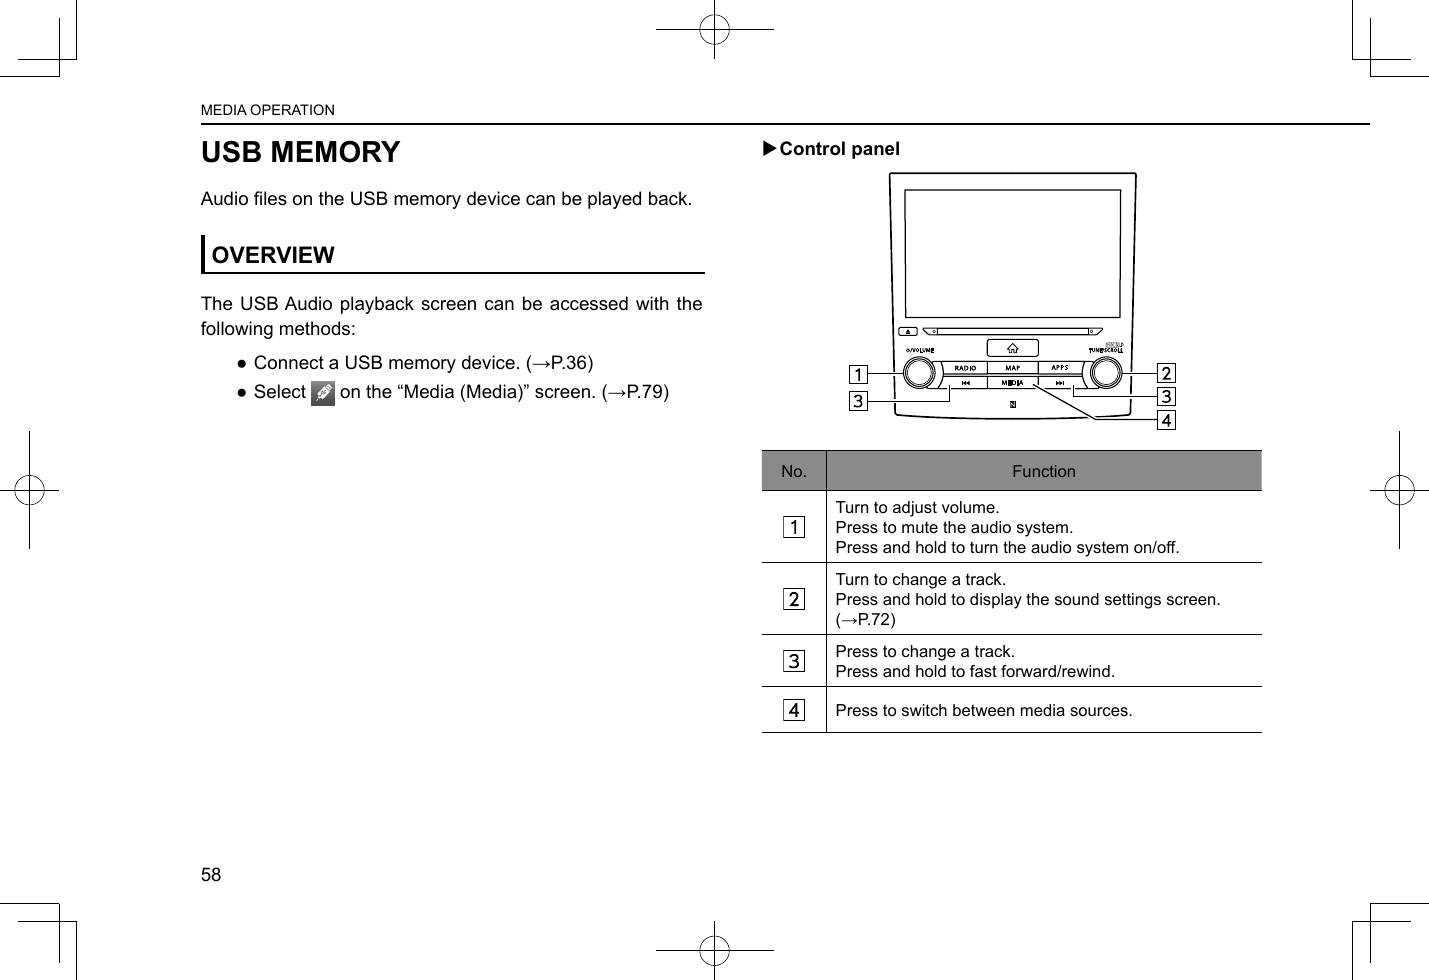 USB MEMORYAudio les on the USB memory device can be played back.OVERVIEWThe USB Audio playback screen can be accessed with the following methods: ● Connect a USB memory device. (→P.36) ●Select   on the “Media (Media)” screen. (→P.79) XControl panelNo. FunctionTurn to adjust volume.Press to mute the audio system.Press and hold to turn the audio system on/off.Turn to change a track.Press and hold to display the sound settings screen. (→P.72)Press to change a track.Press and hold to fast forward/rewind.Press to switch between media sources.MEDIA OPERATION58